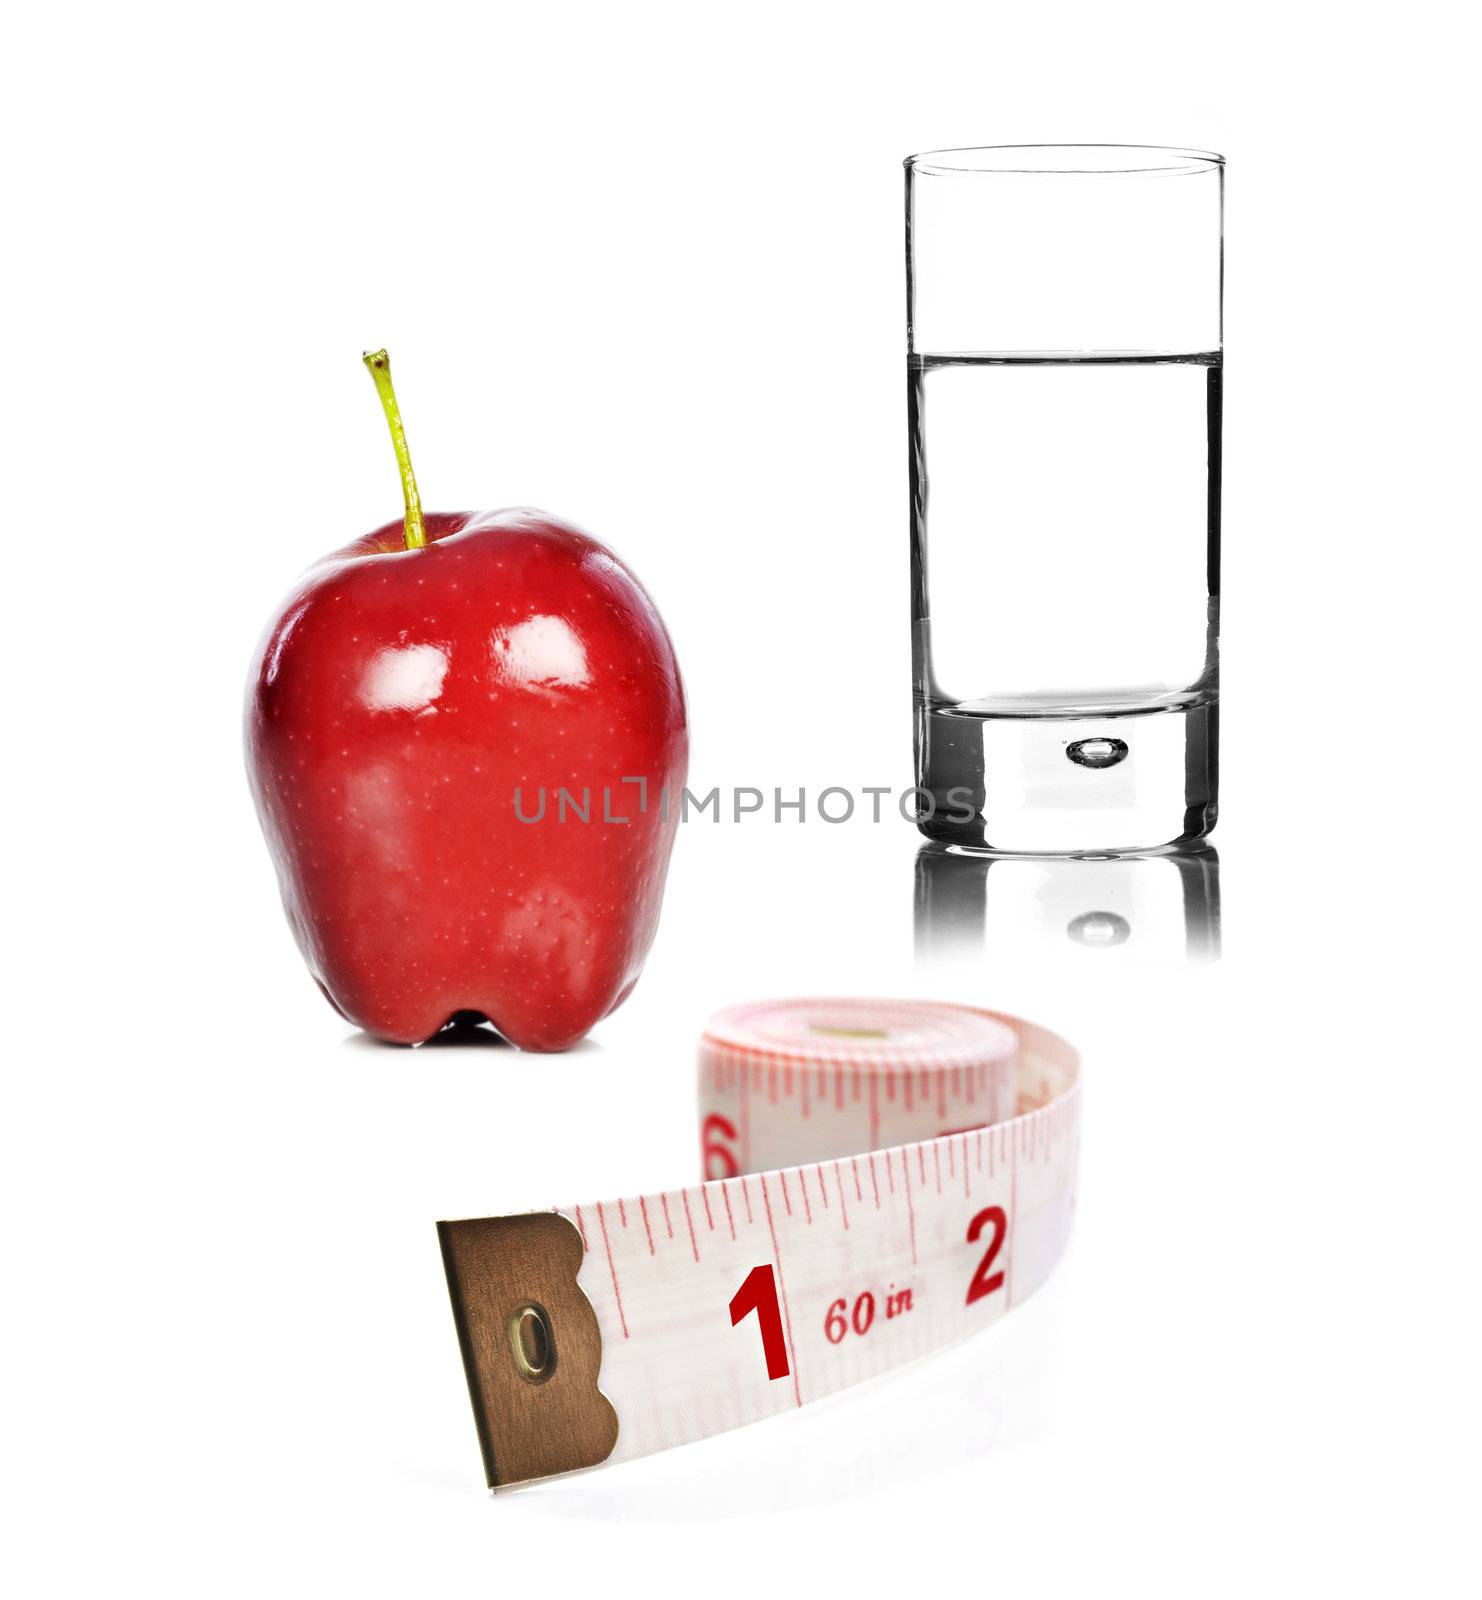 Healthy lifestyle - apple glass of water and tape measure on white background by tish1